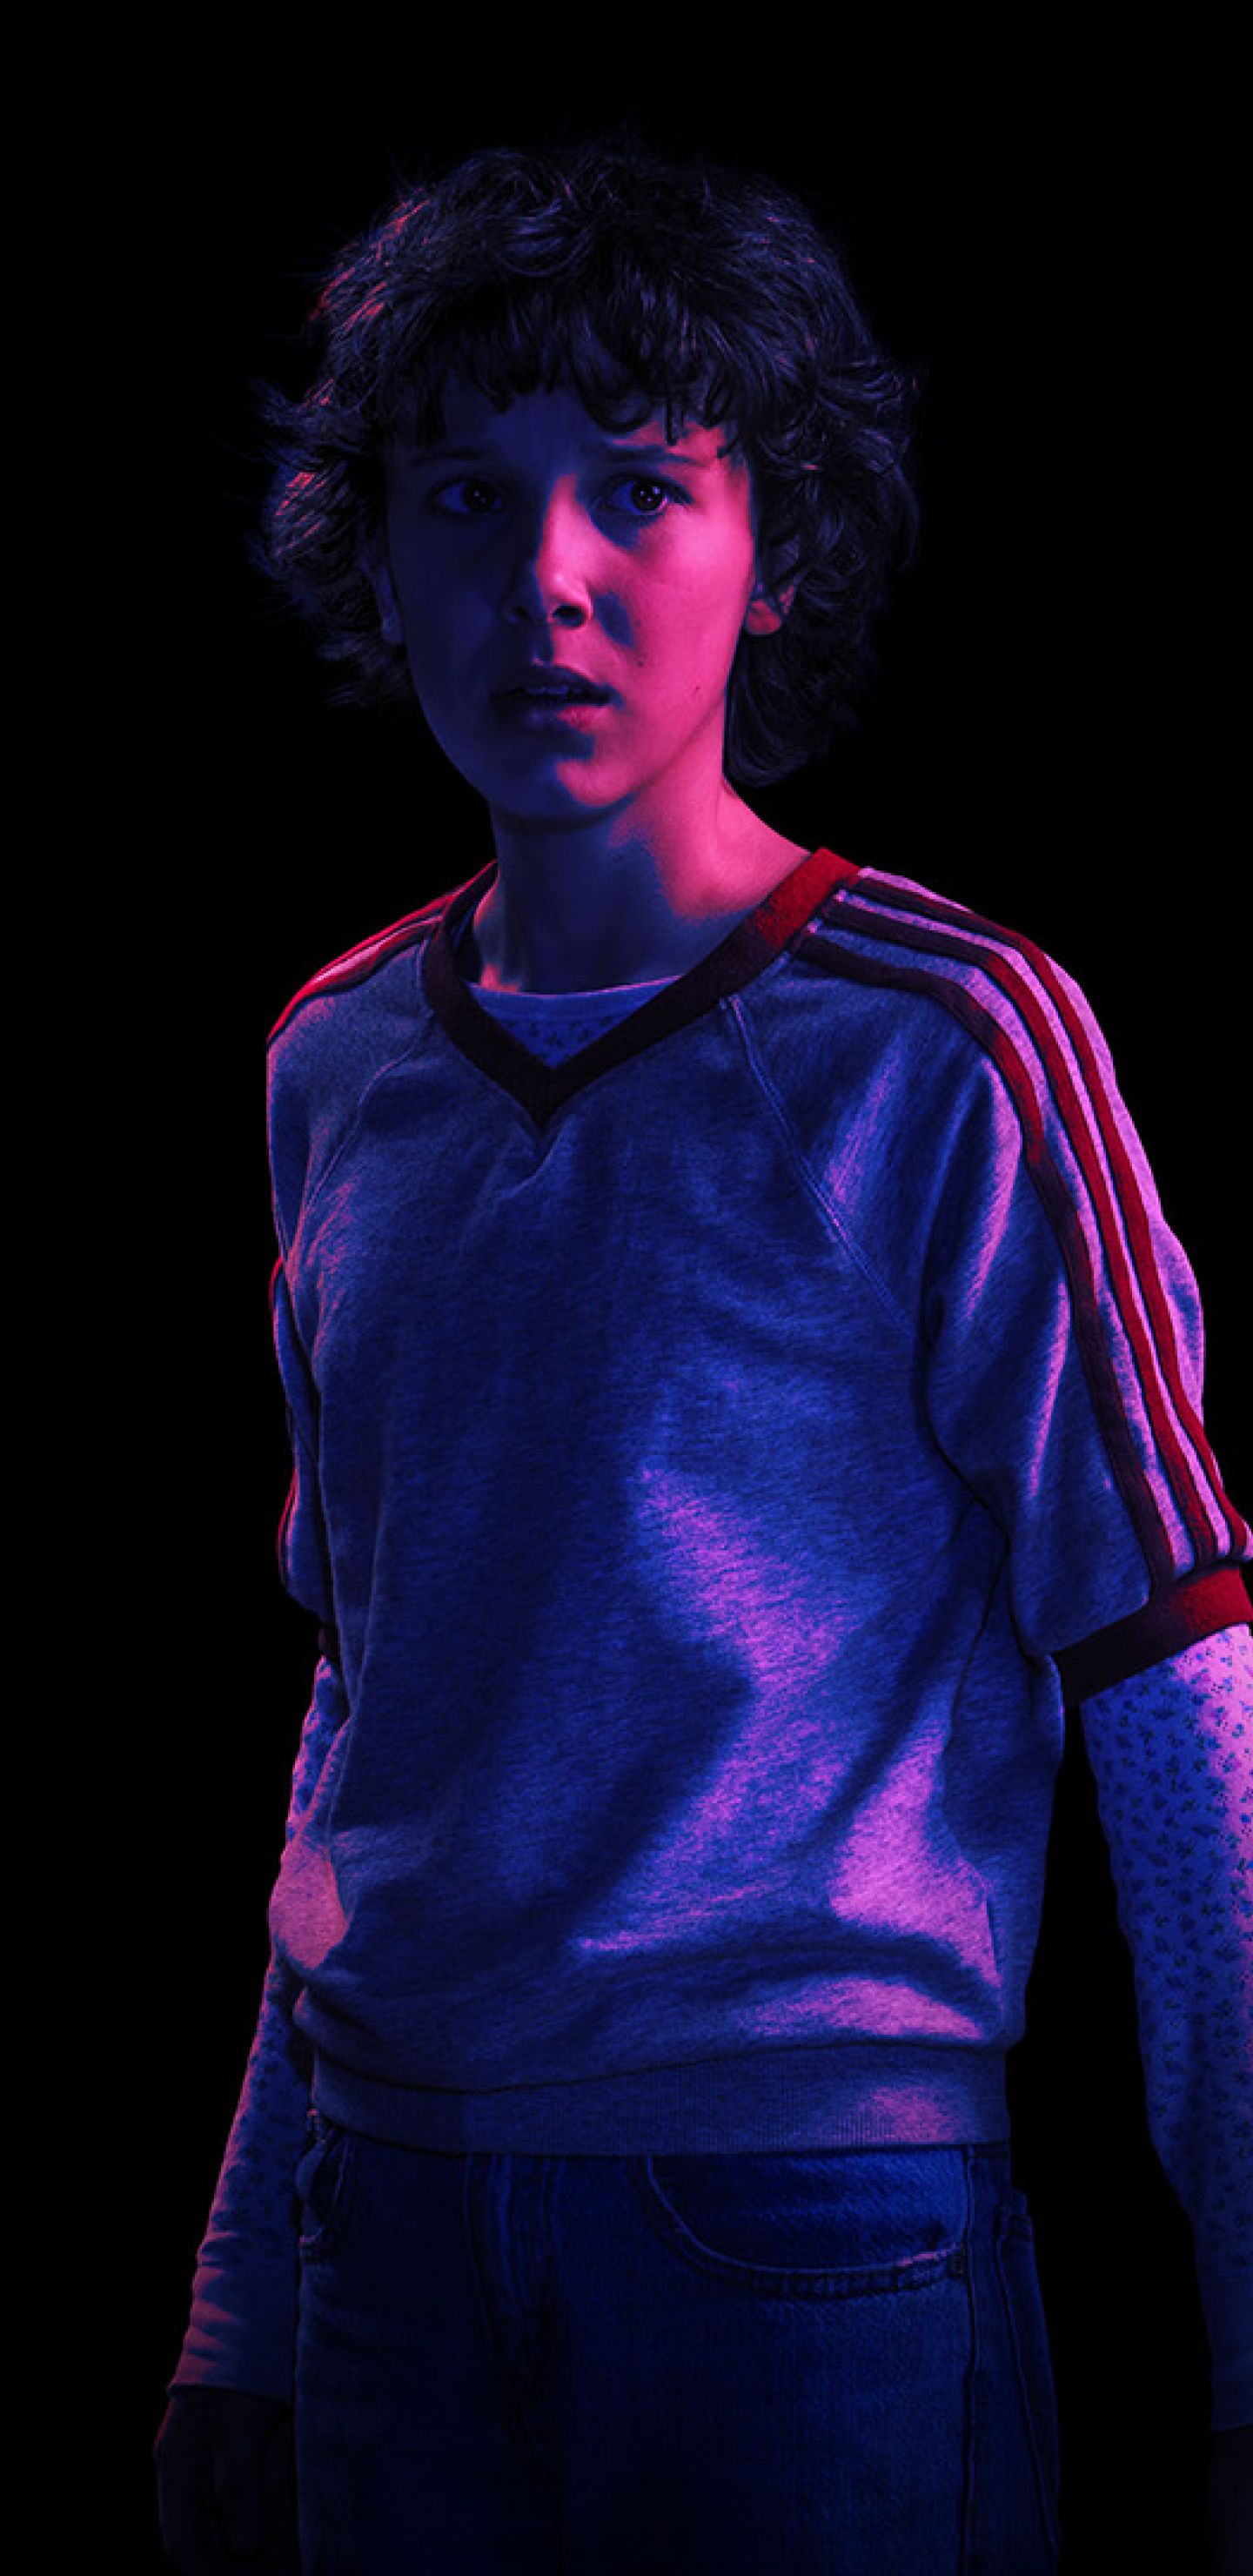 Millie Bobby Brown In Stranger Things Samsung Galaxy